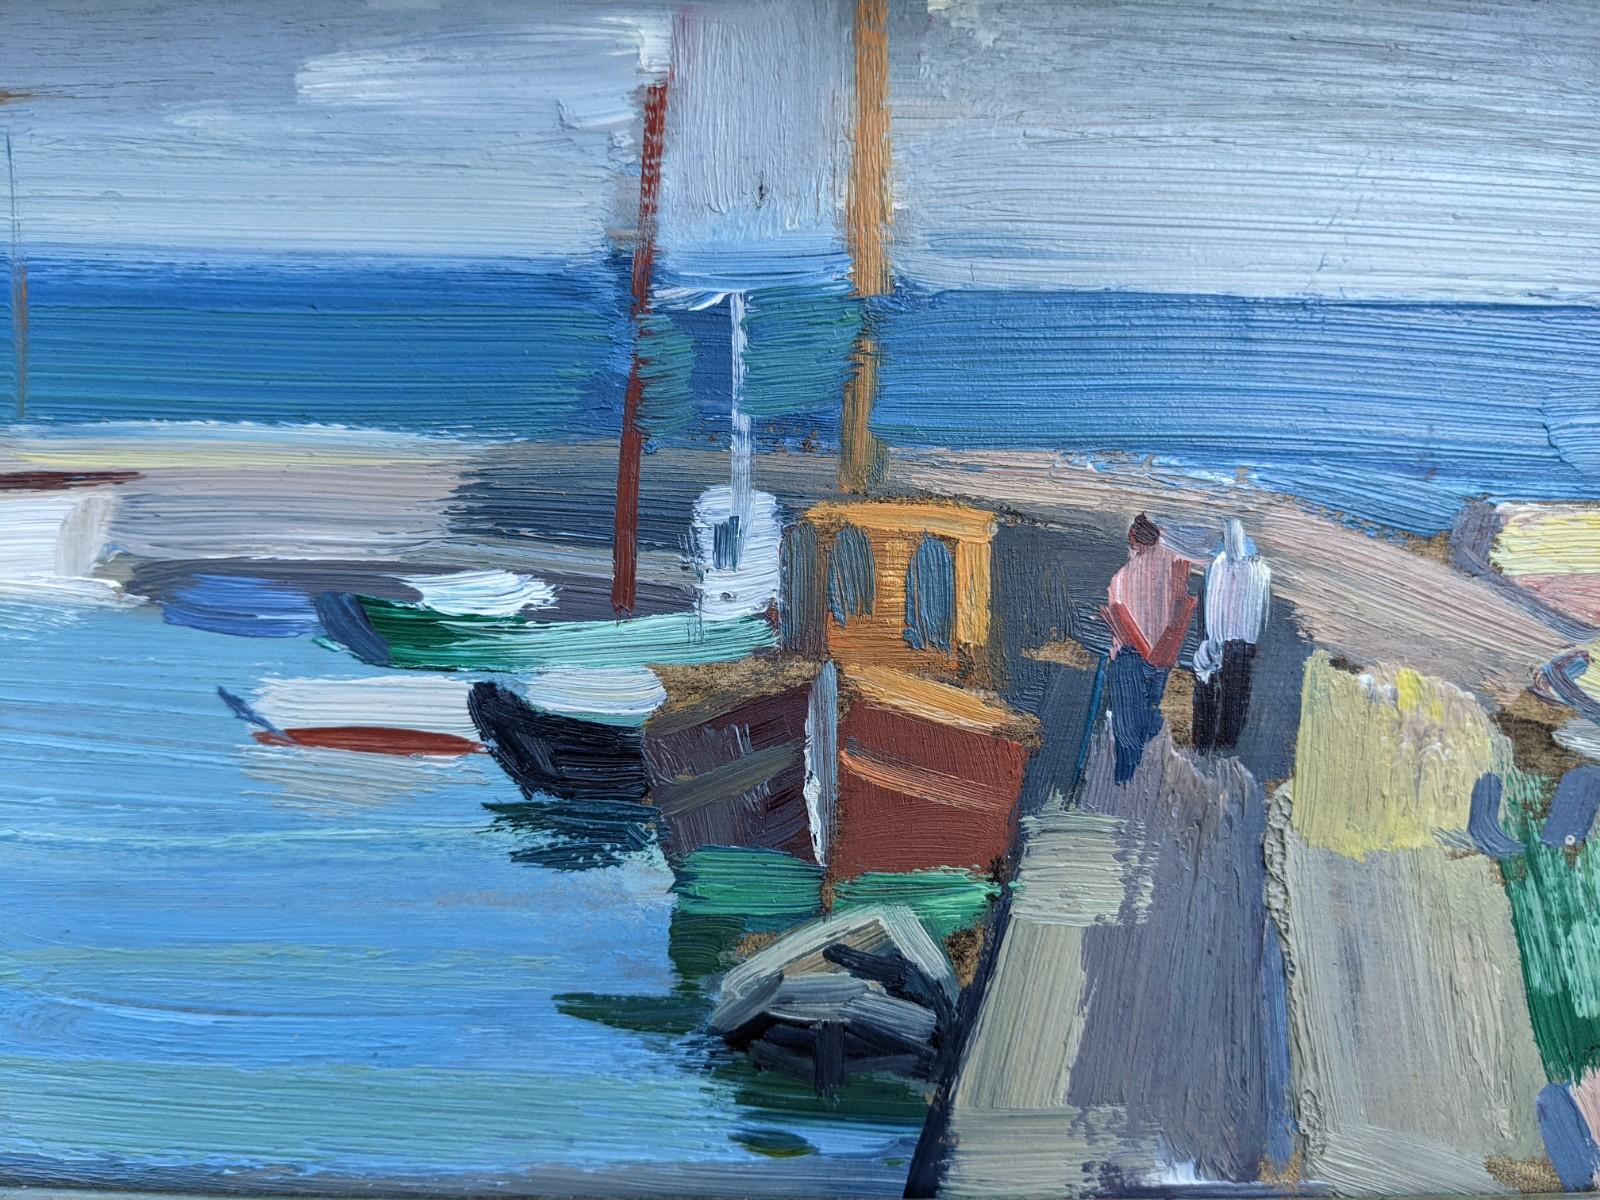 HARBOUR BOARDWALK
Size: 29 x 48 cm (including frame)
Oil on Board

A soothing semi-abstract mid century oil painting depicting a coastal harbour. The painting is well balanced with equal visual weight as boats sit on the left on the artwork, and 2